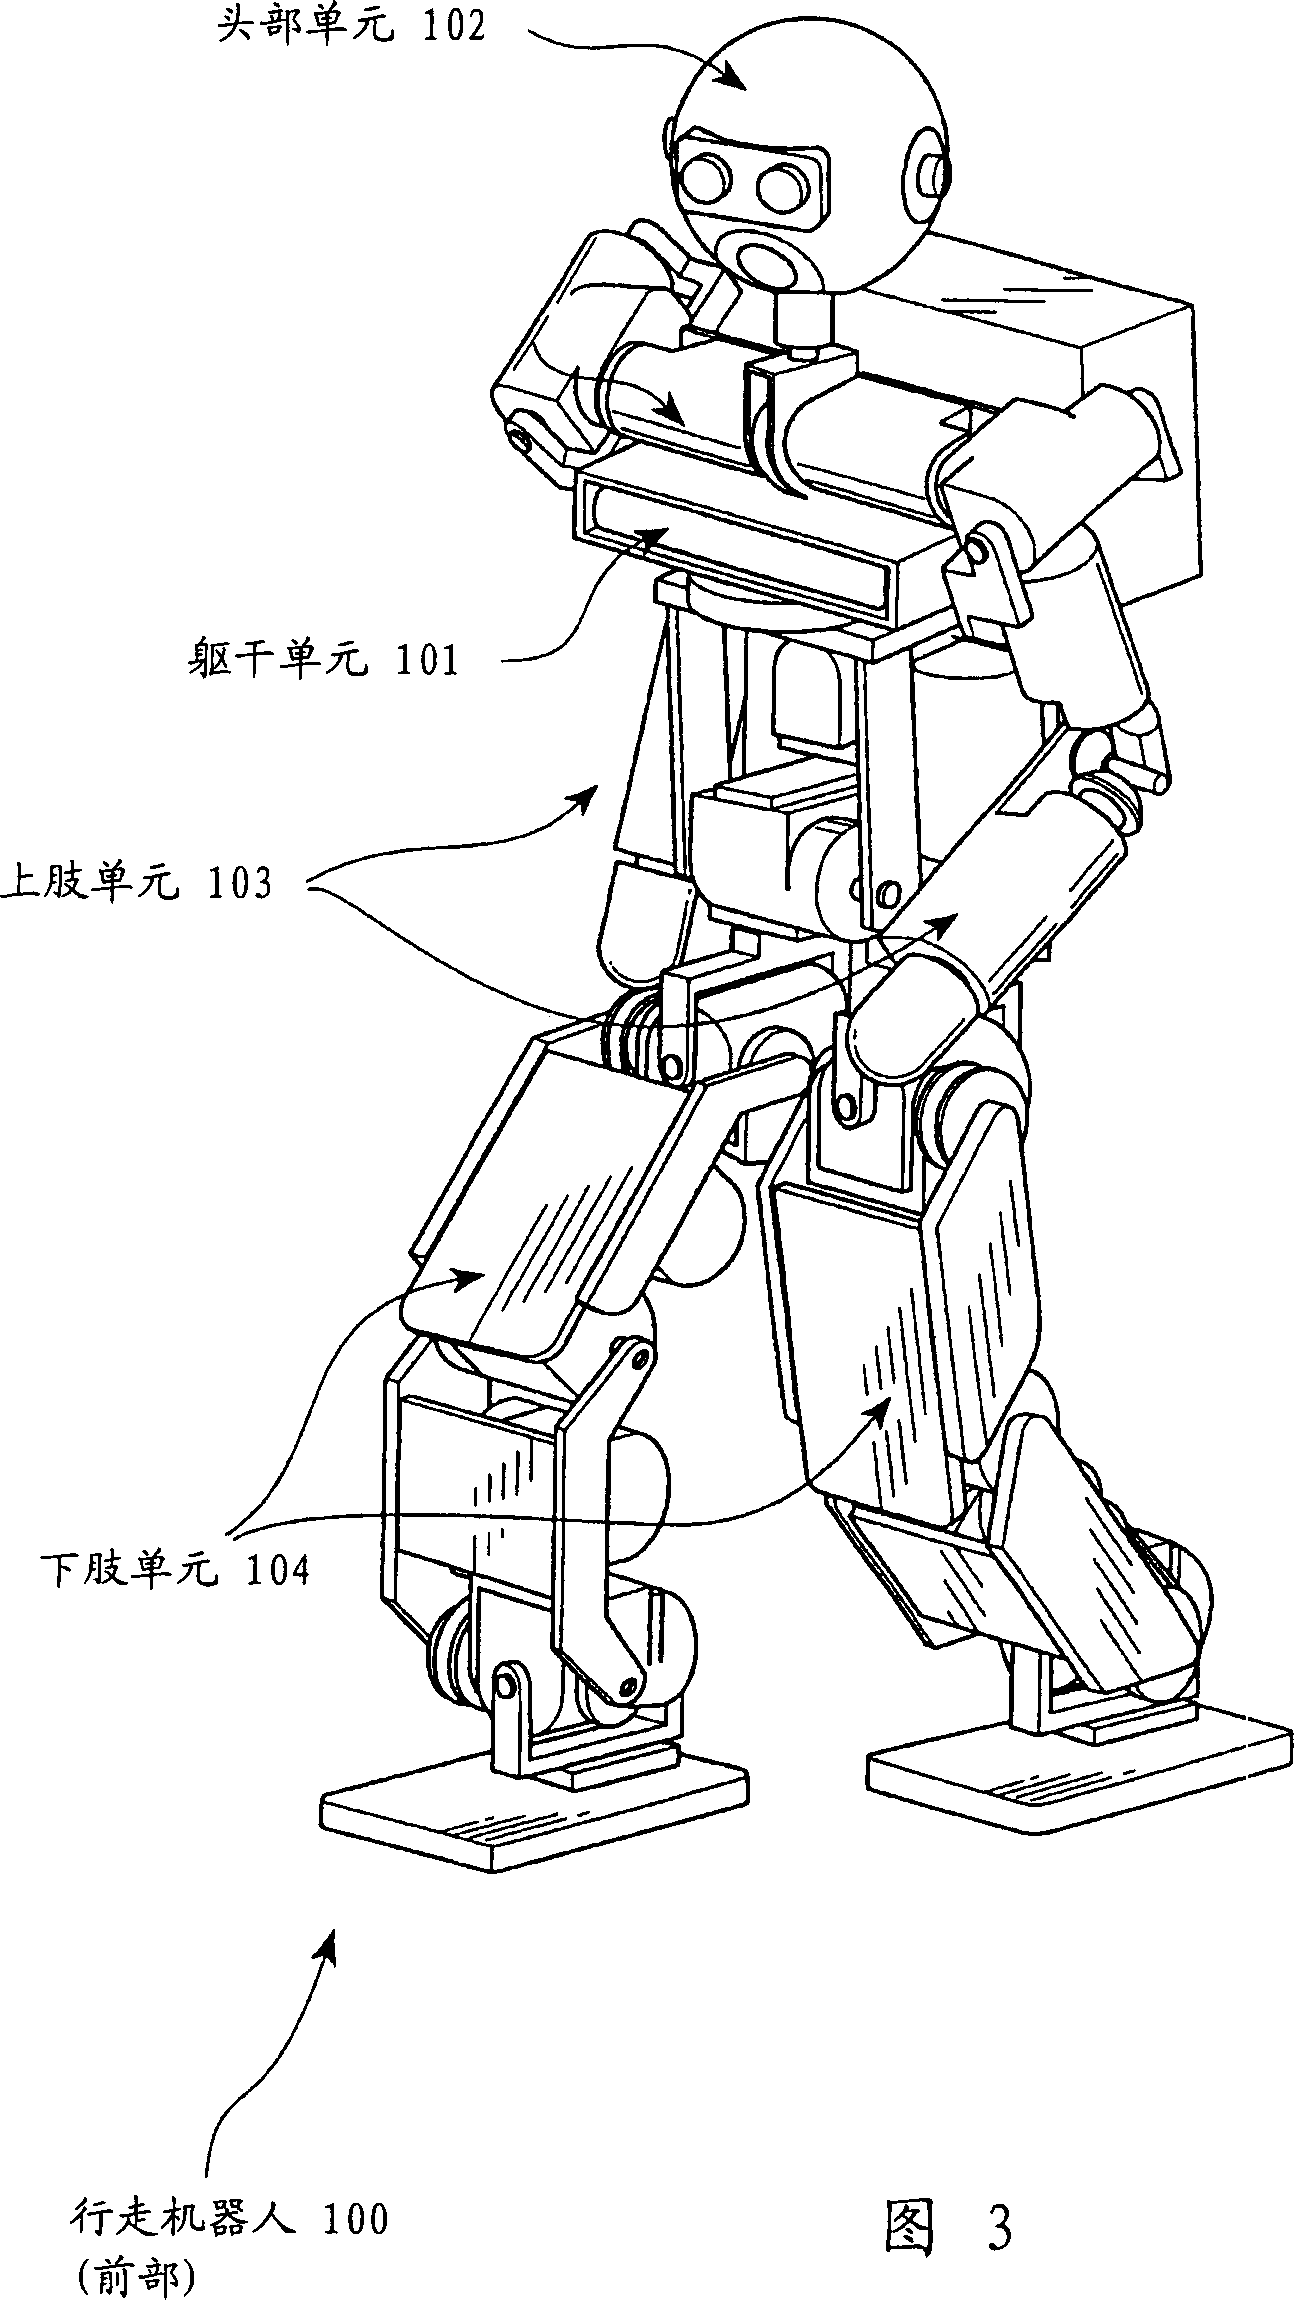 Legged mobile robot and control method thereof, leg structure and mobile leg unit for legged mobile robot